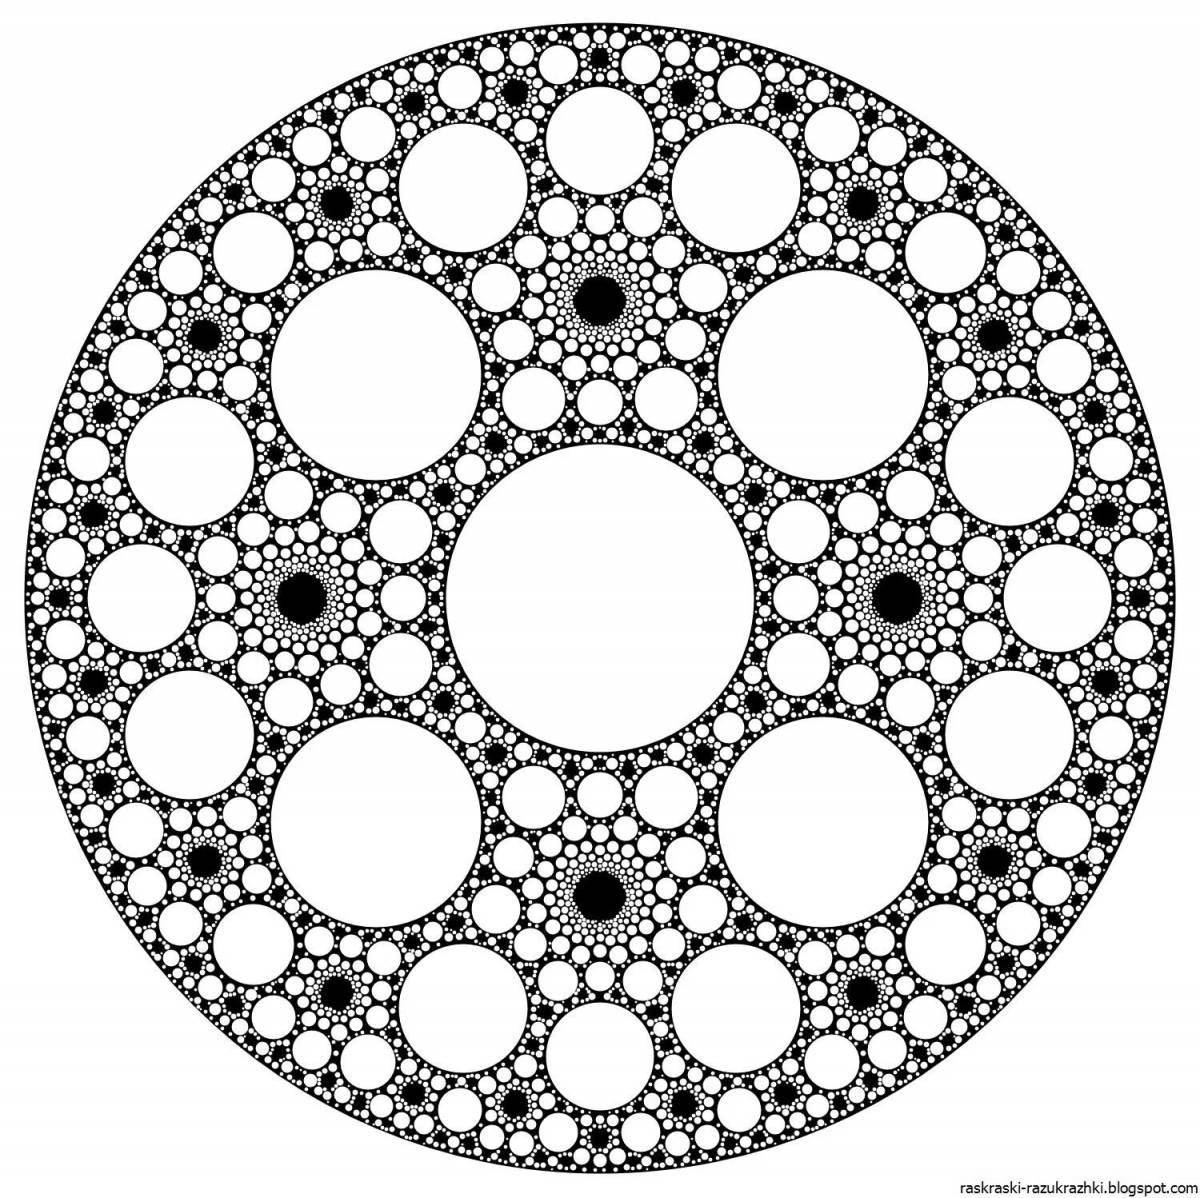 Coloring page with attractive circular pattern